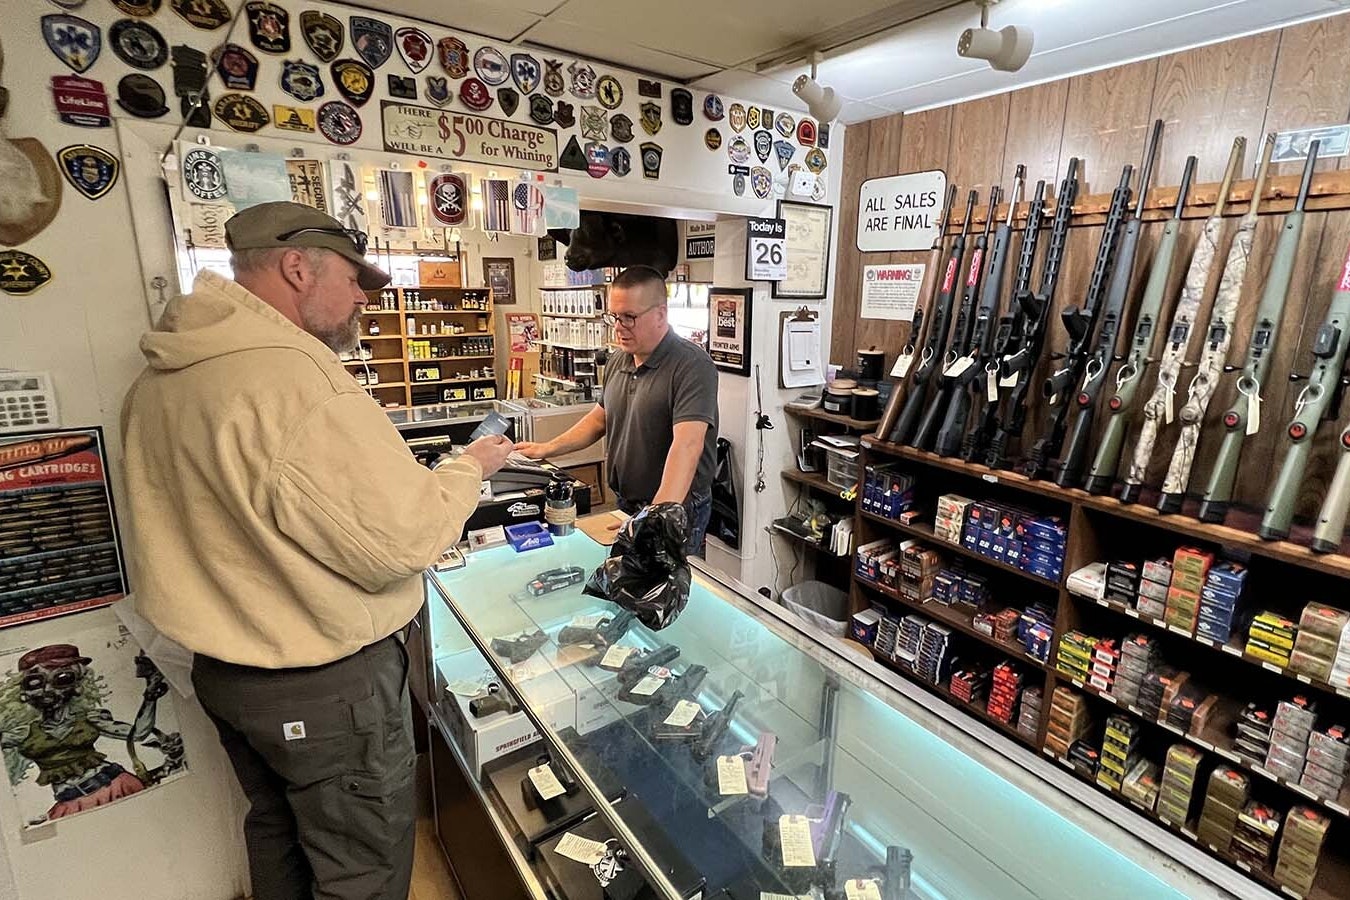 Frontier Arms and Supply owner Ryan Allen, right, conducts a credit card transaction with a customer Monday at the Cheyenne gun shop.